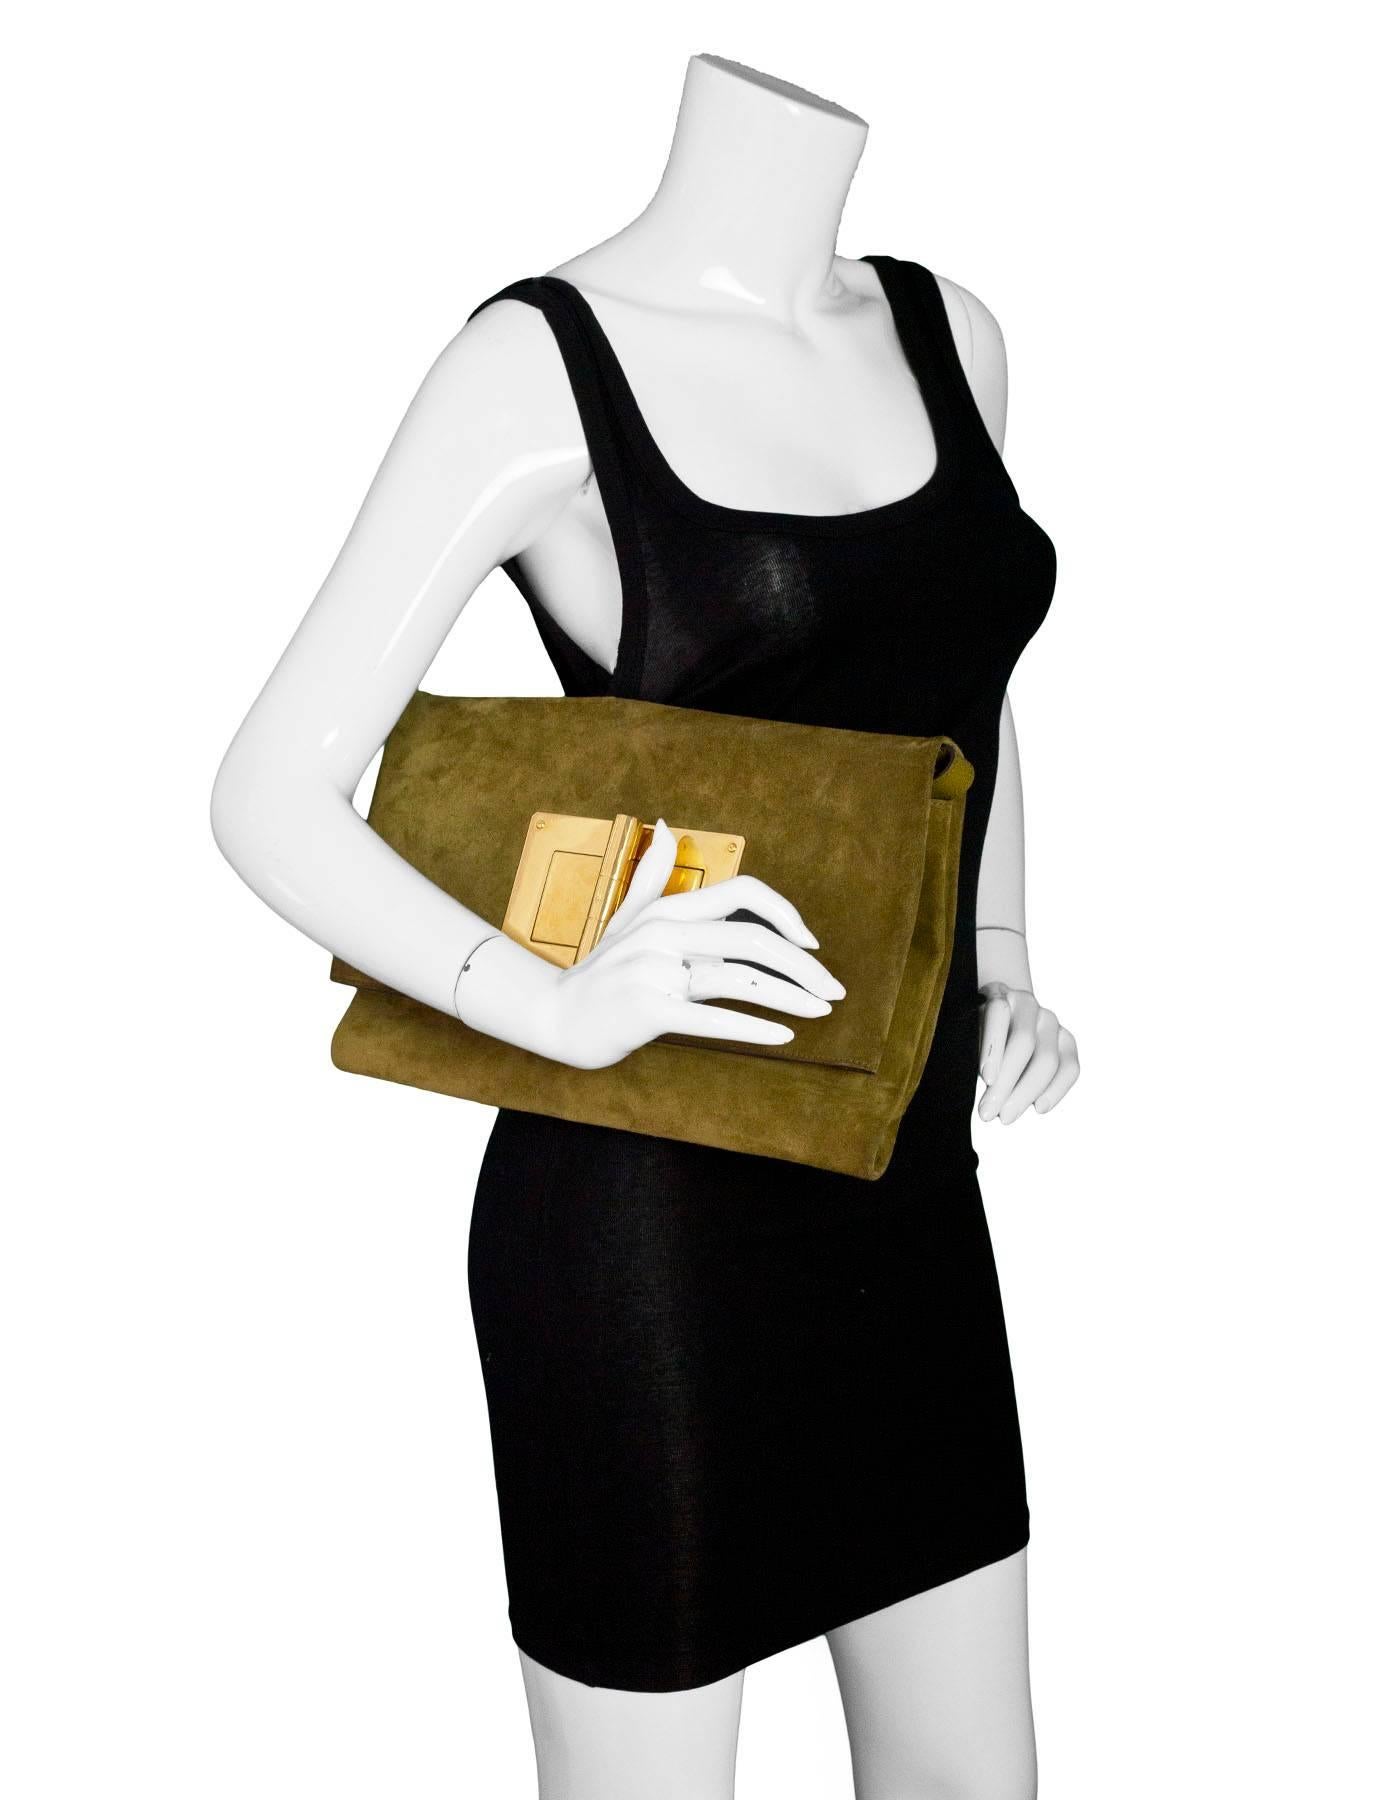 Tom Ford Olive Suede Natalia Turnlock Soft Clutch/Shoulder Bag

Can be worn as clutch or shoulder bag

Made In: Italy
Color: Olive green
Hardware: Goldtone
Materials: Suede, metal
Lining: Brown textile
Closure/Opening: Flap top with large twist